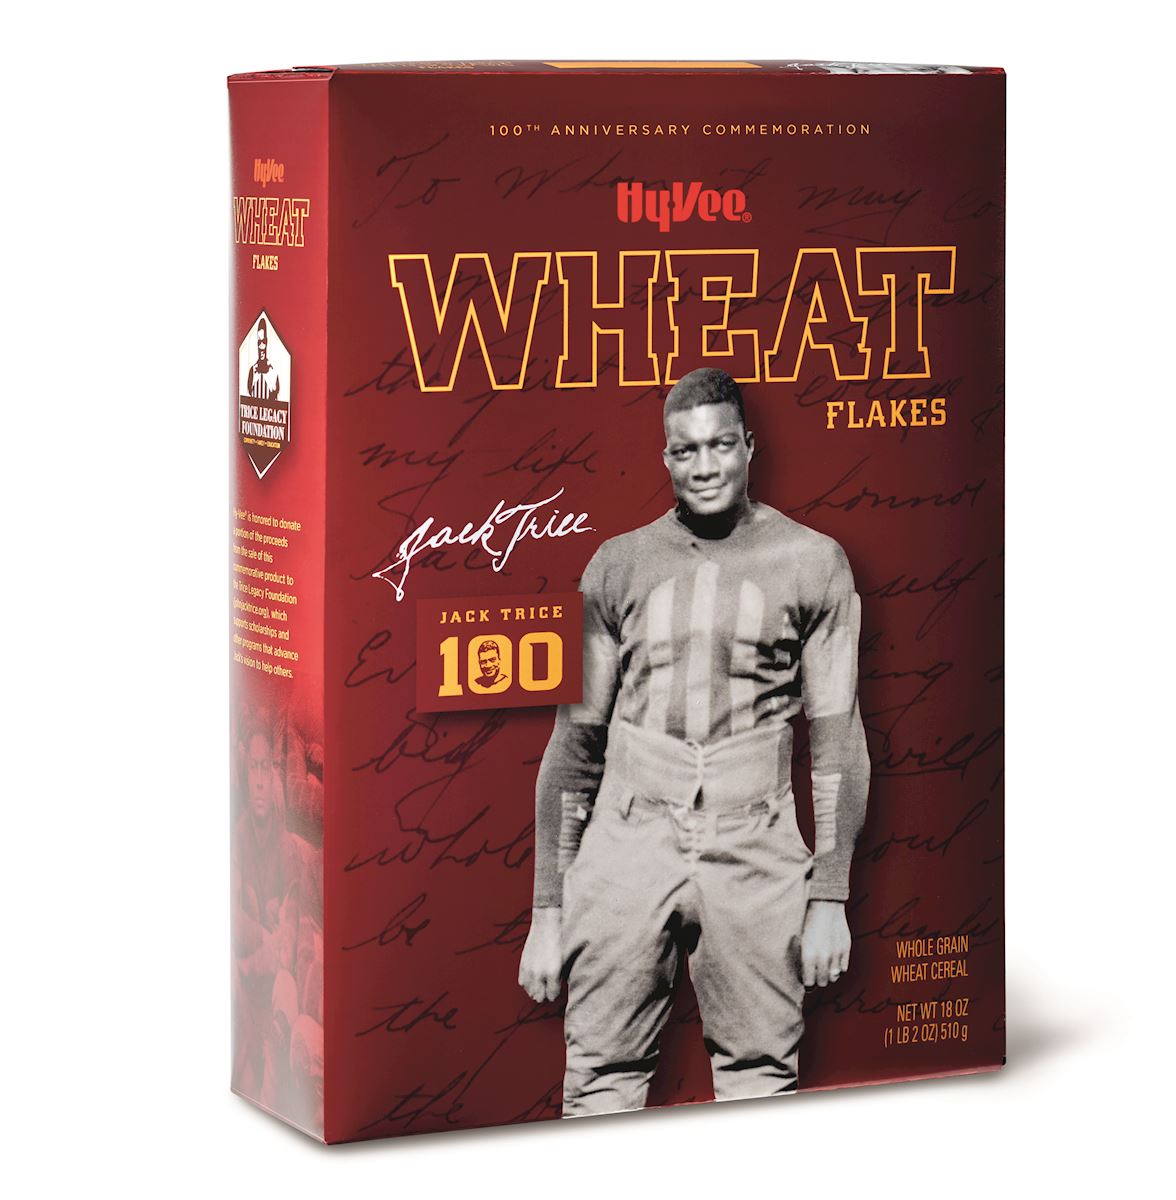 Hy-Vee to Honor Jack Trice with Limited-Edition Cereal